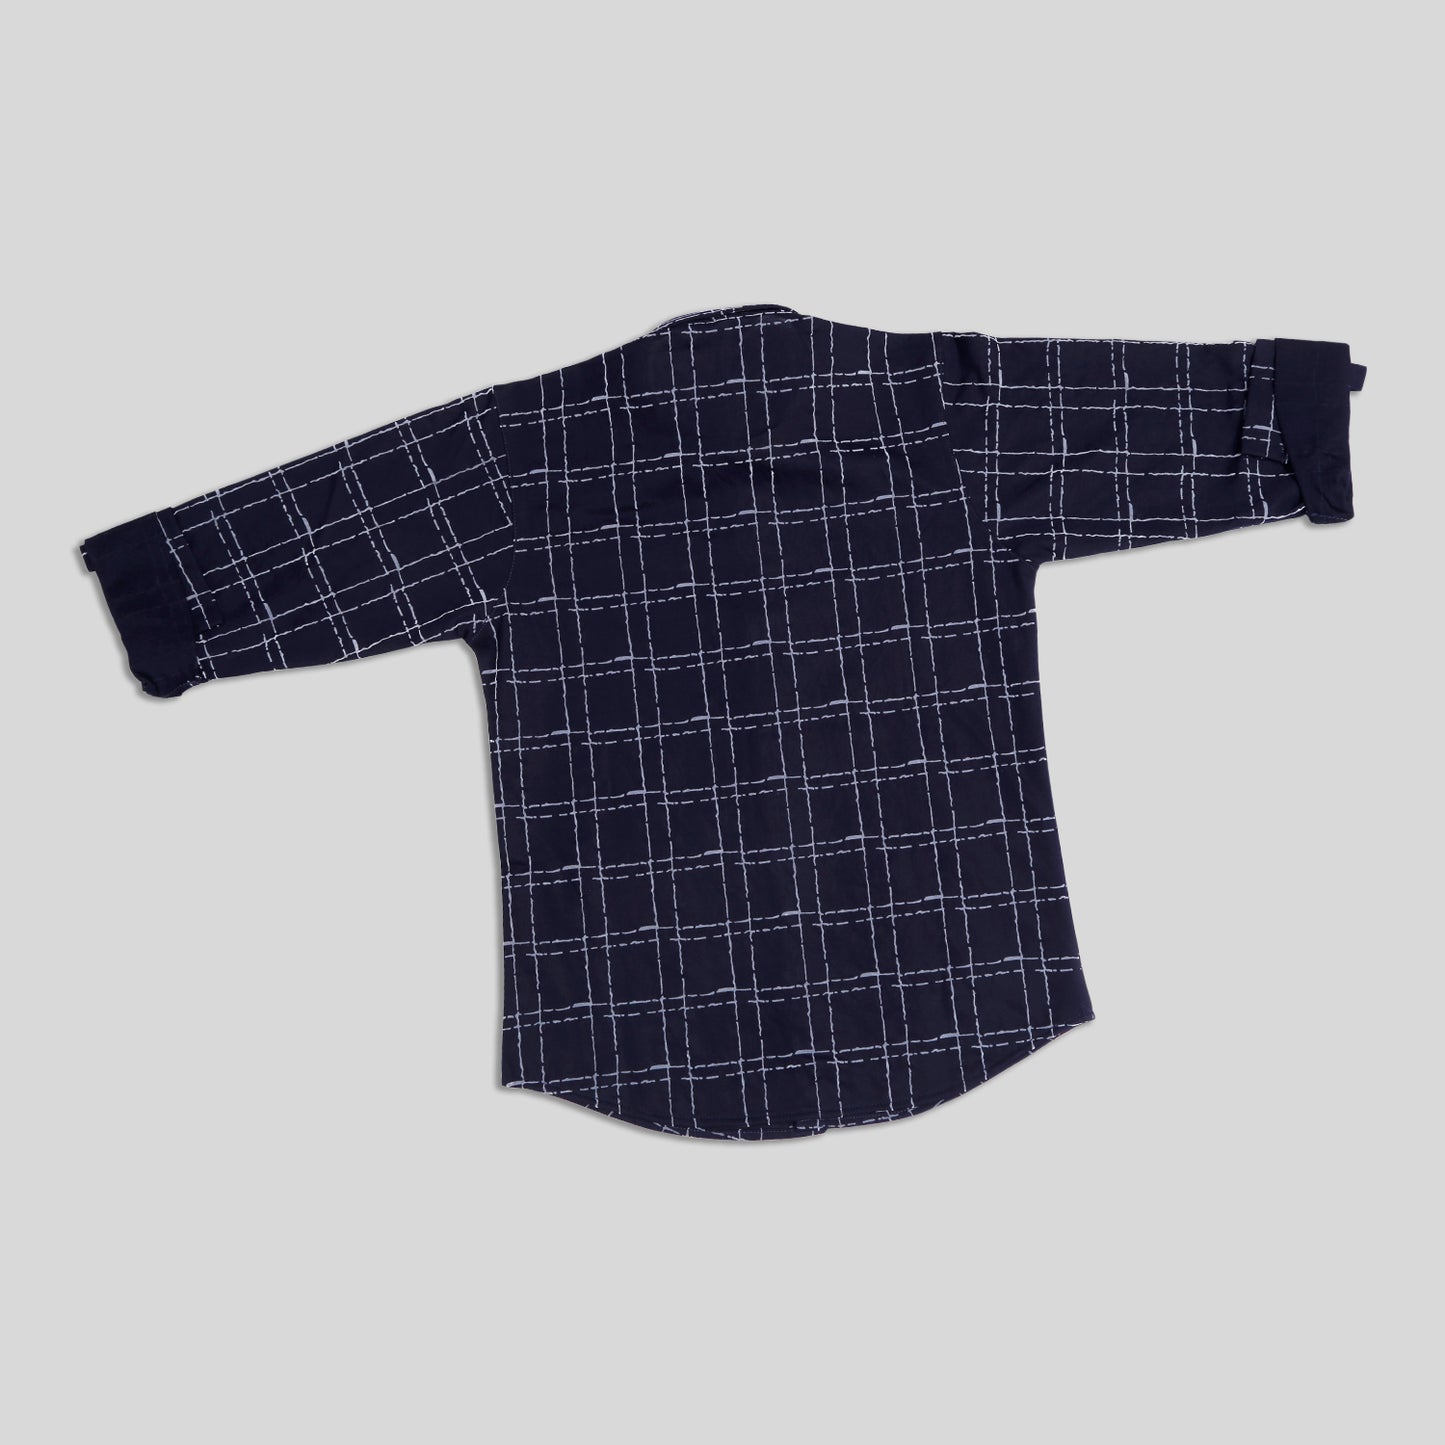 Checkmate Boredom: Elevate Casual Fun with This Unique Checked Shirt!